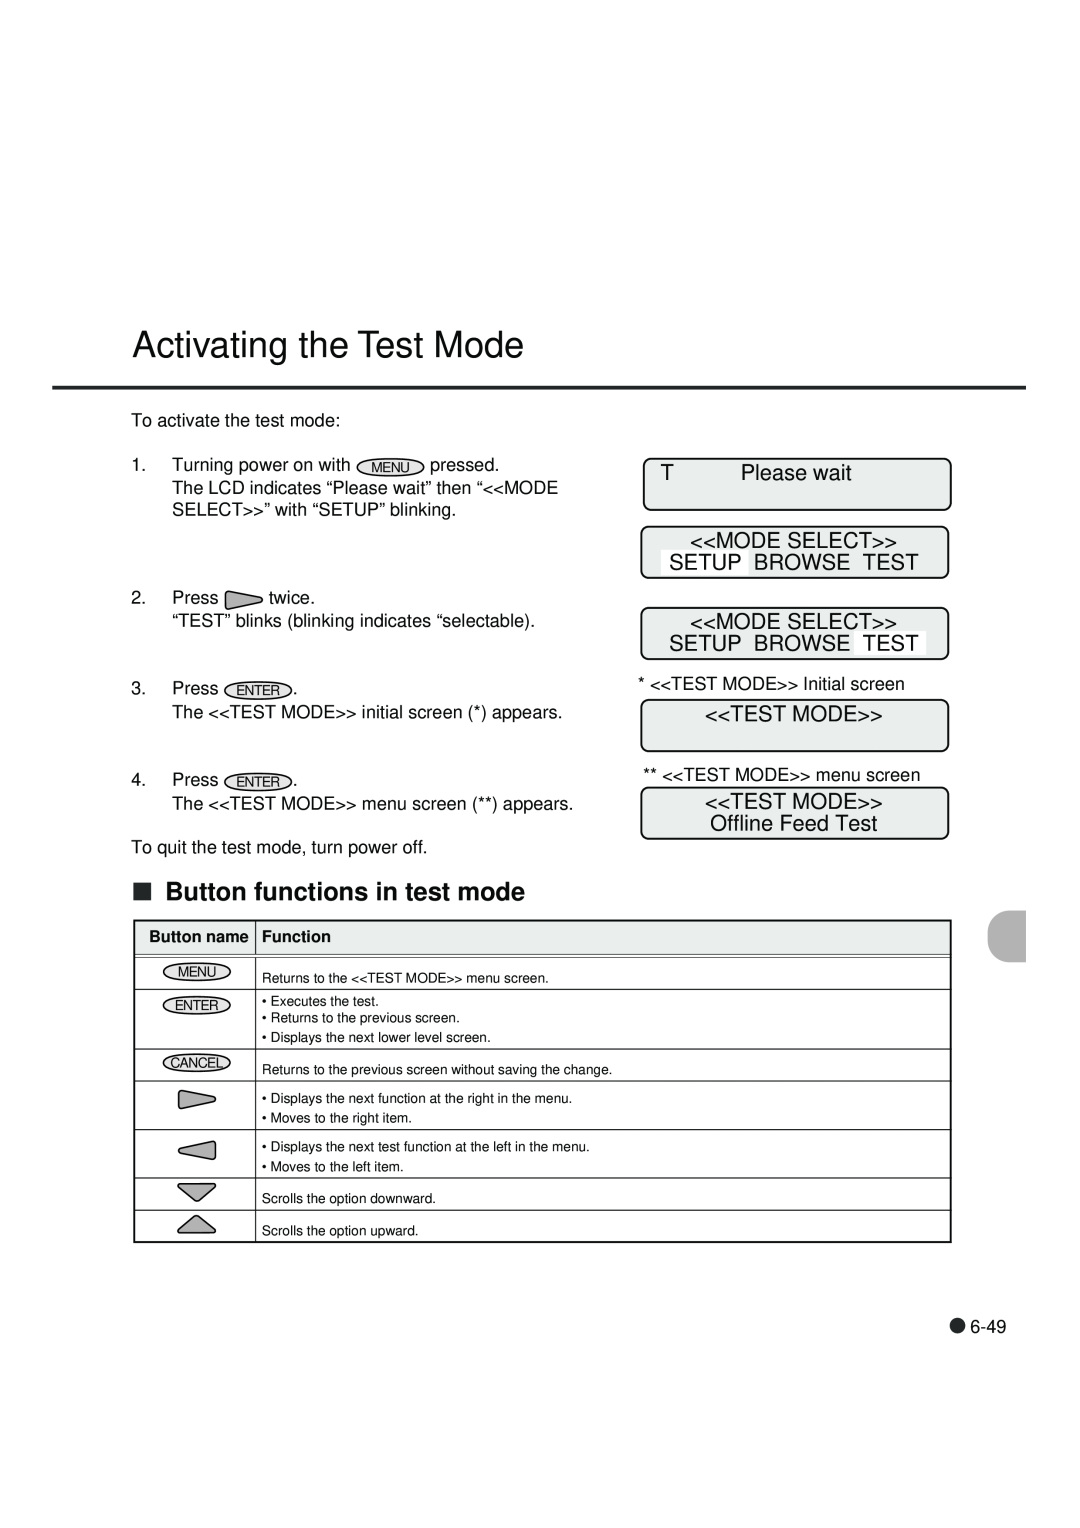 Fujitsu fi-4990C Activating the Test Mode, Button functions in test mode, Setup Browse Test, TEST MODE Offline Feed Test 